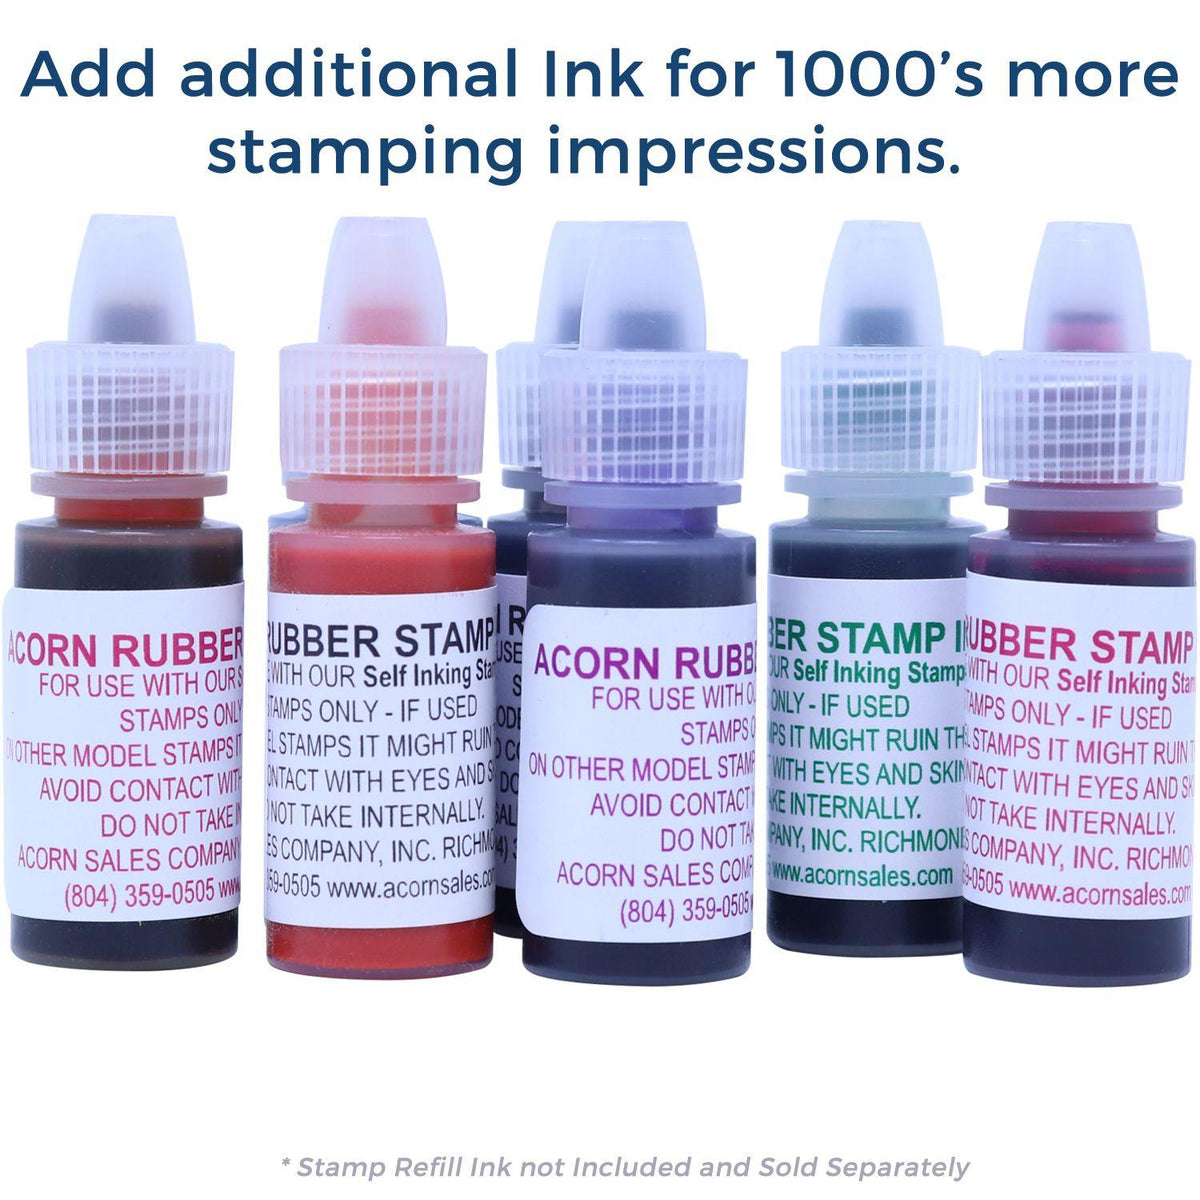 Refill Inks for Large Pre-Inked Essential Job Stamp Available